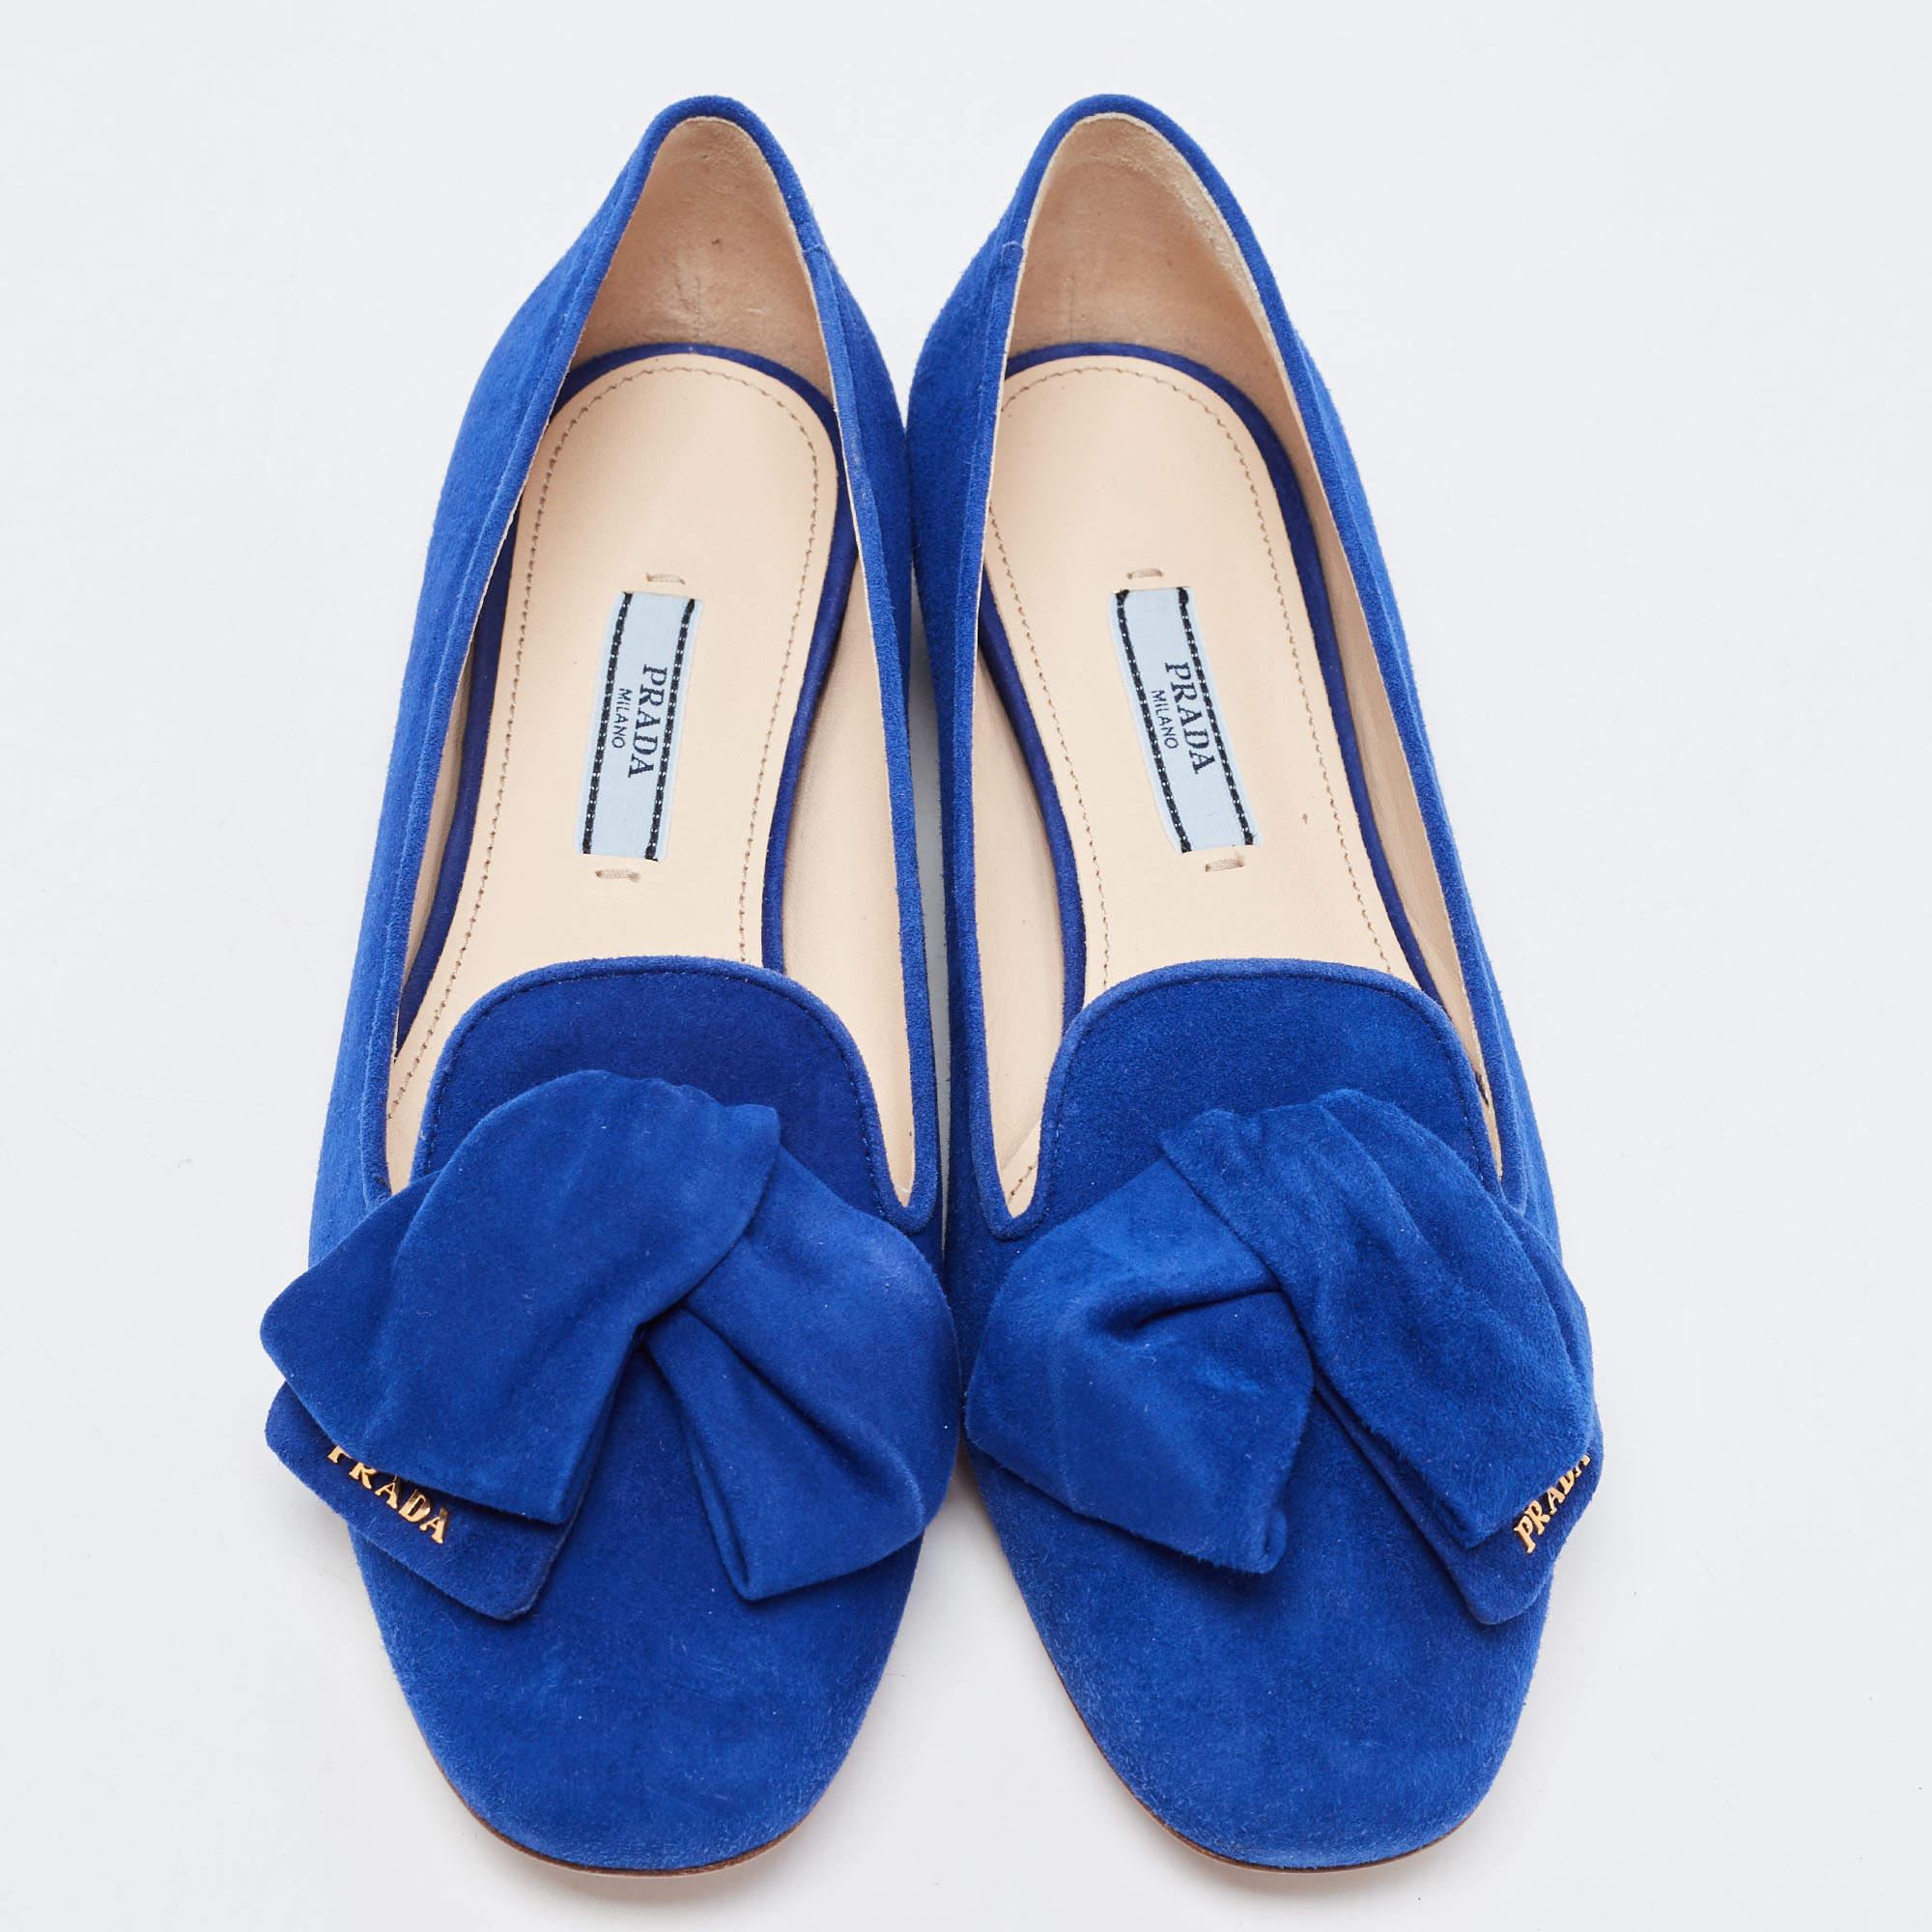 Complete your look by adding these designer ballet flats to your collection of everyday footwear. They are crafted skilfully to grant the perfect fit and style.

Includes: Original Box, Original Dustbag, Info Booklet

